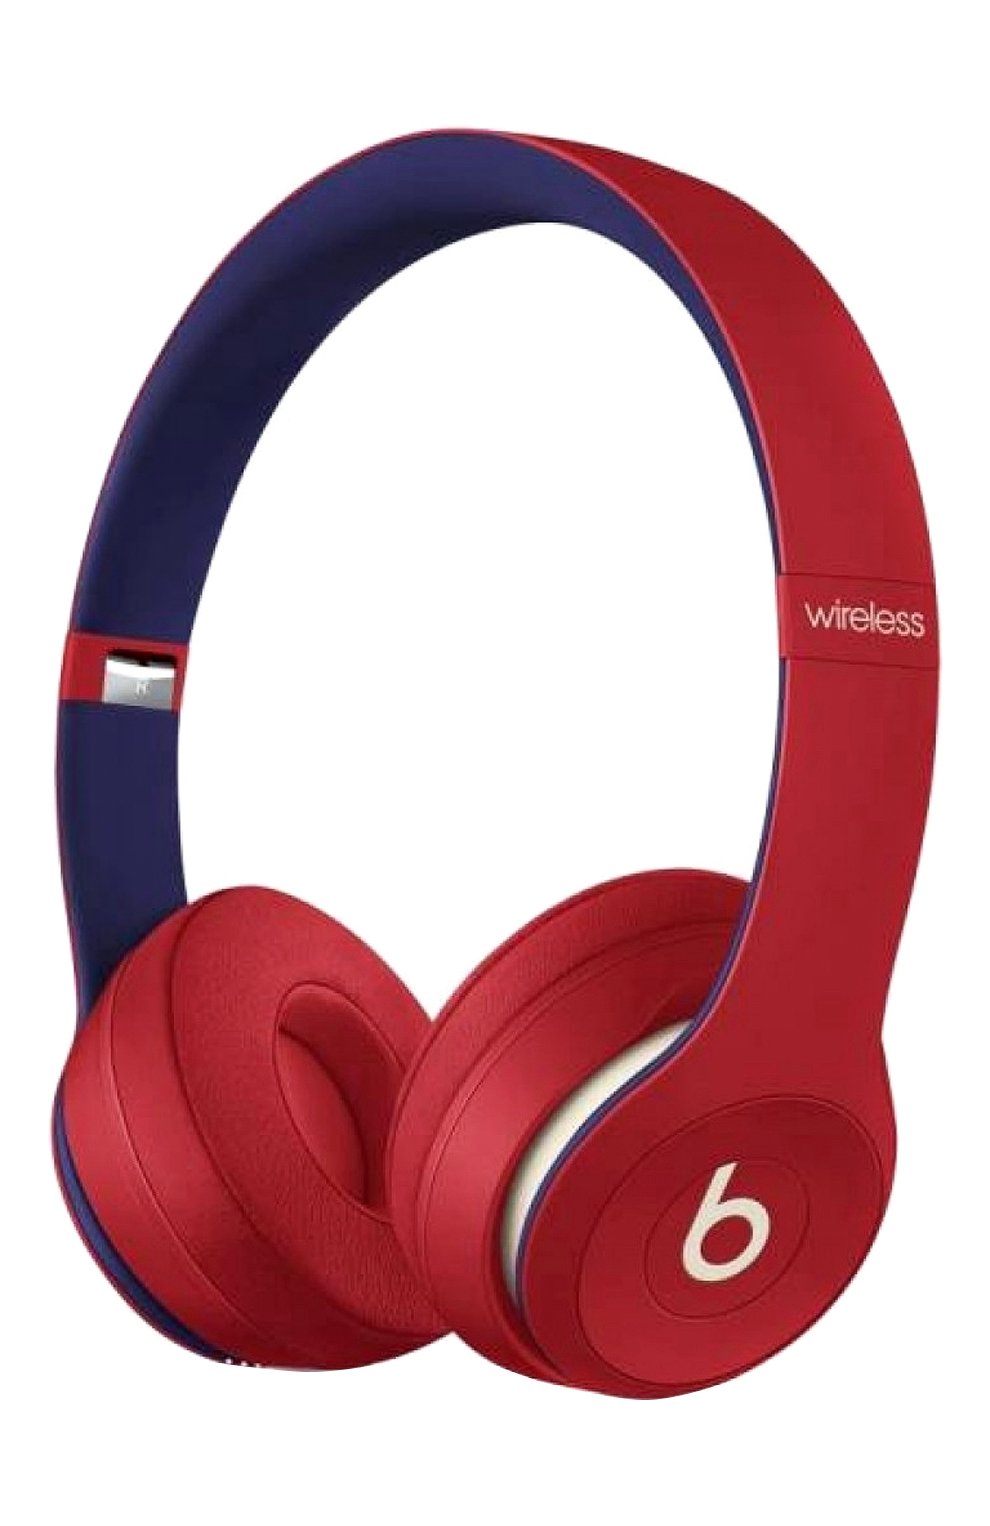 beats solo 3 wireless noise cancelling